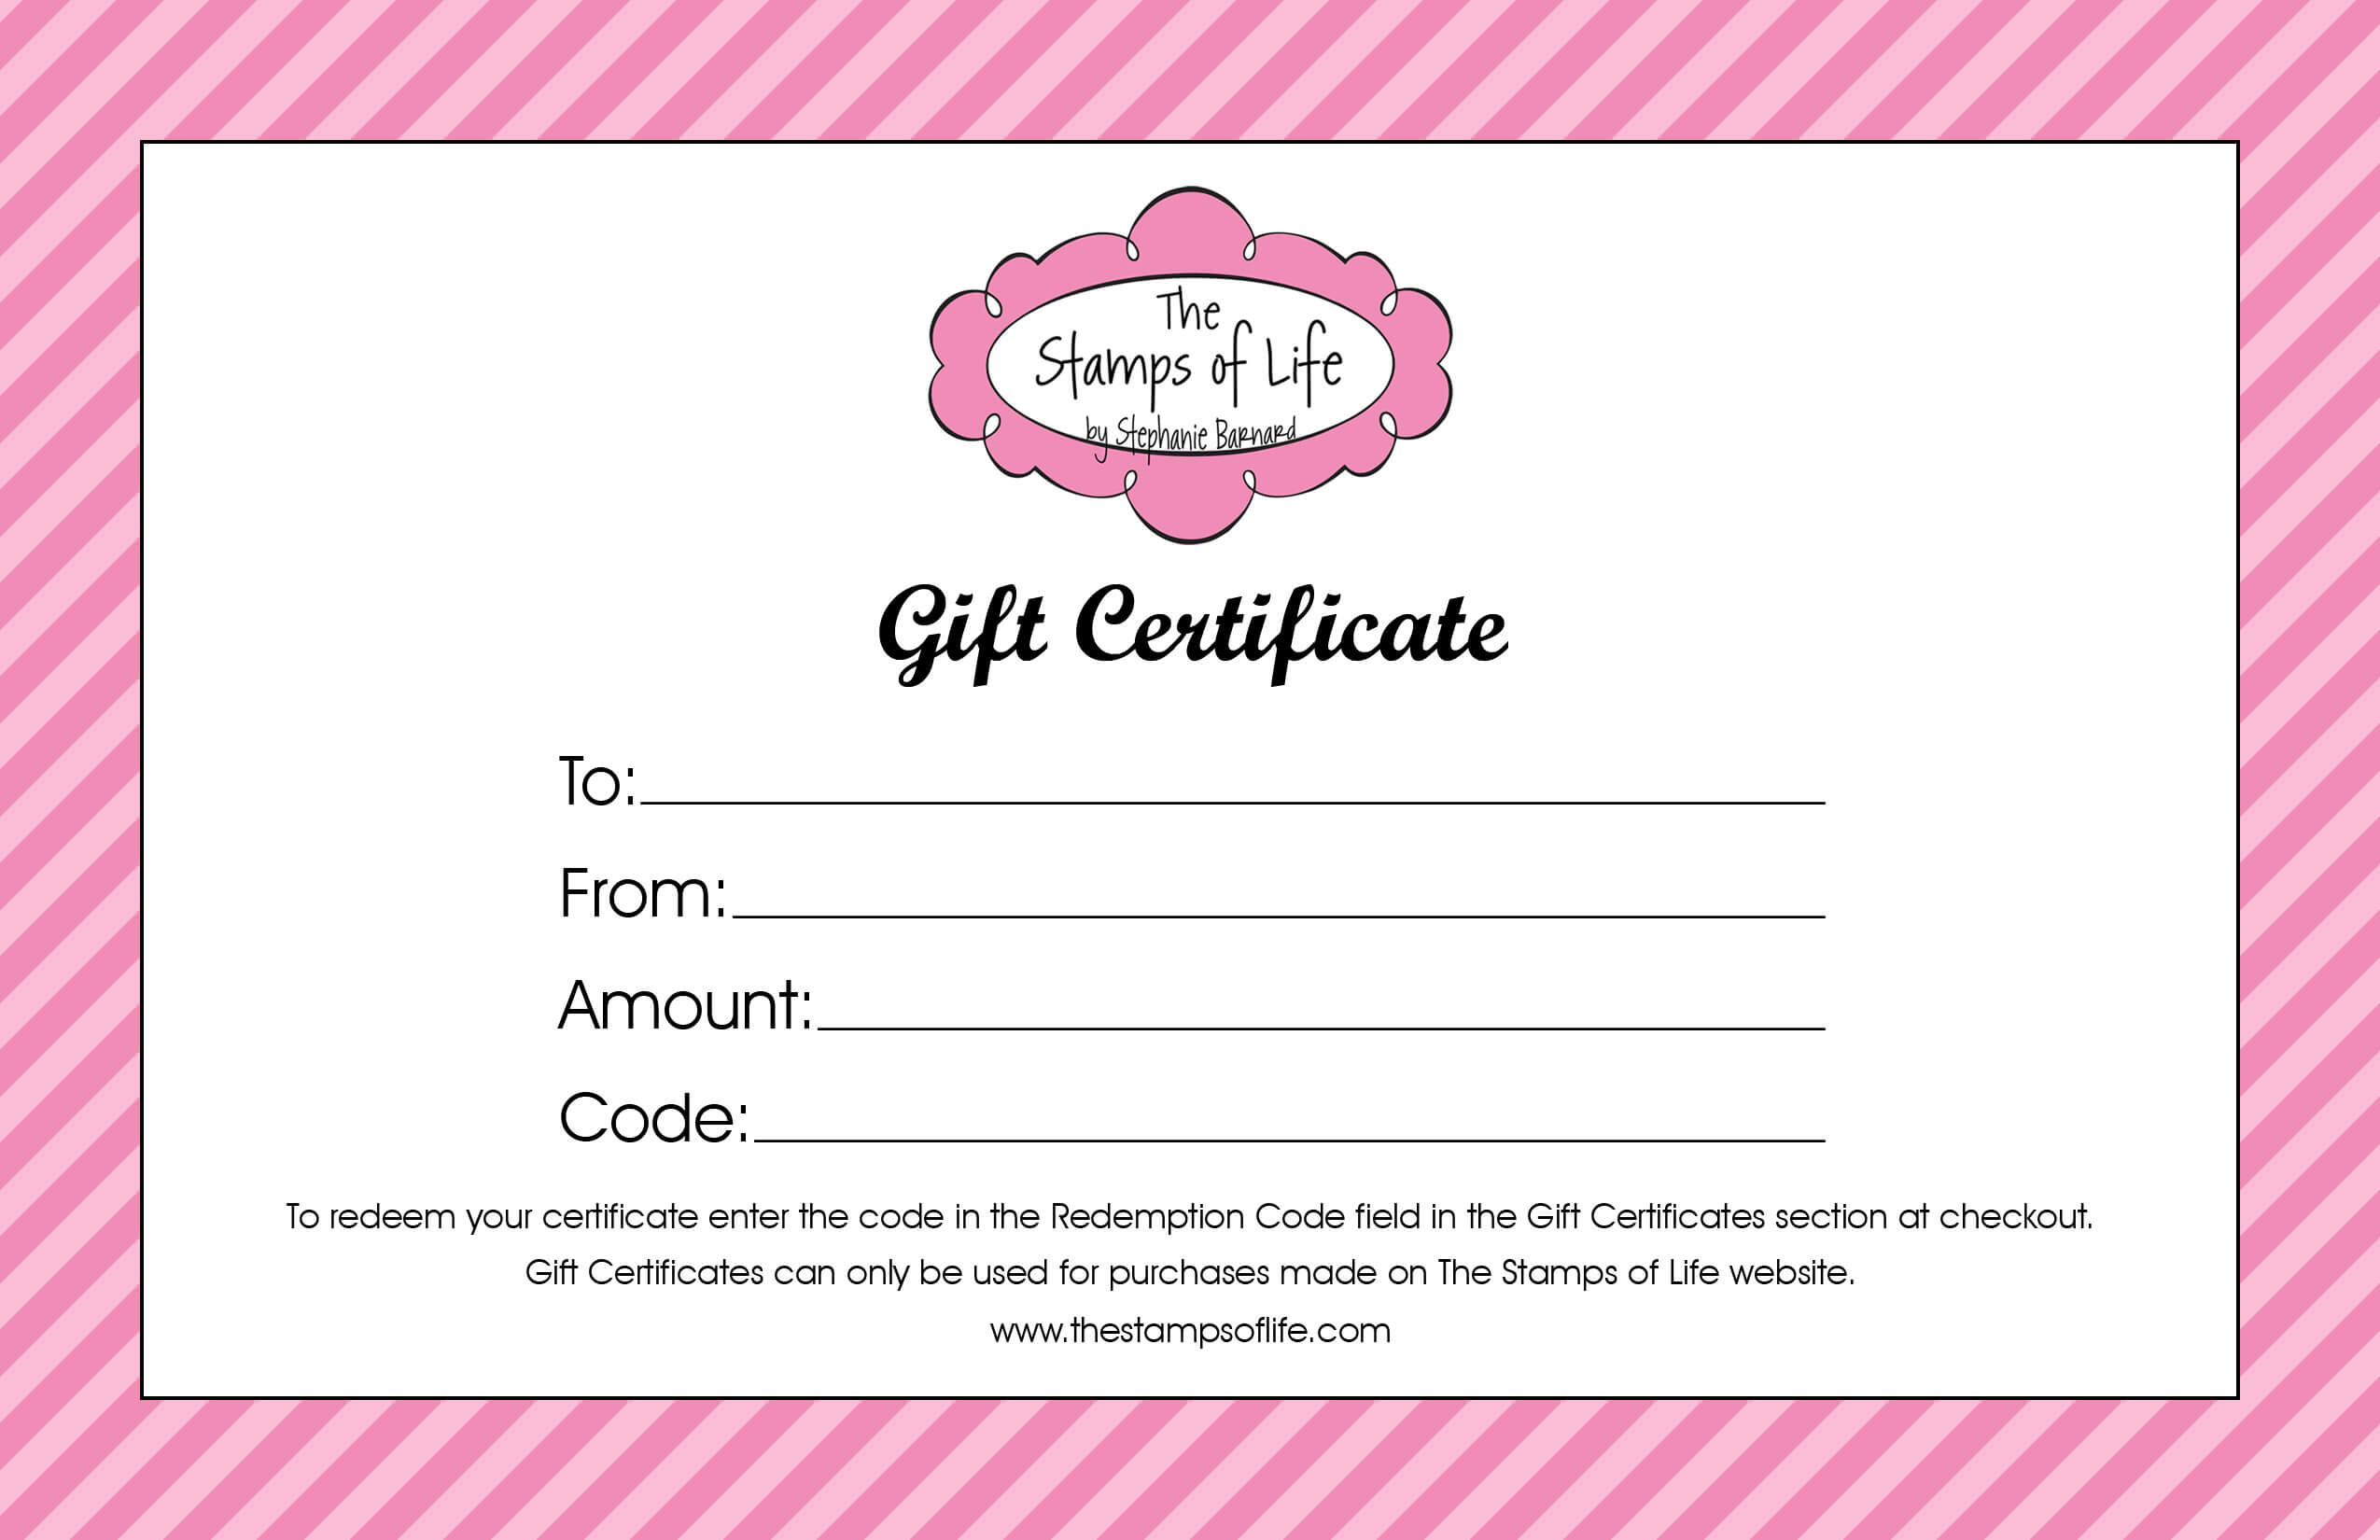 16-free-gift-certificate-templates-examples-word-excel-regarding